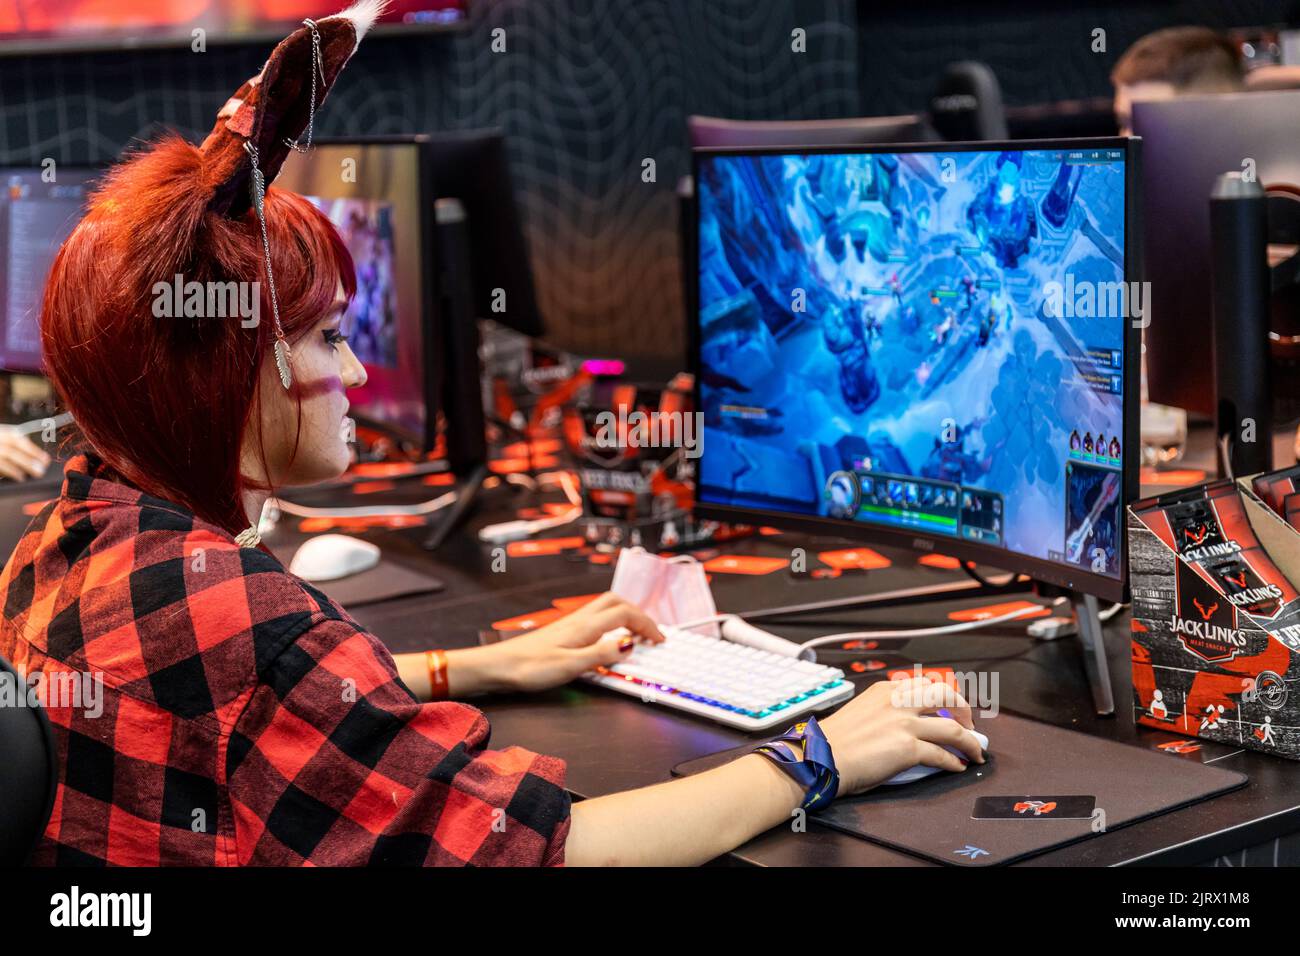 Cologne, Germany. 24th Aug, 2022. Gamescom 2022: Cosplayer plays multiplayer online battle arena game League of Legends. Gamescom is the world's largest trade fair for computer and video games, at Koelnmesse in Cologne, Germany. Credit: Christian Lademann / LademannMedia Stock Photo